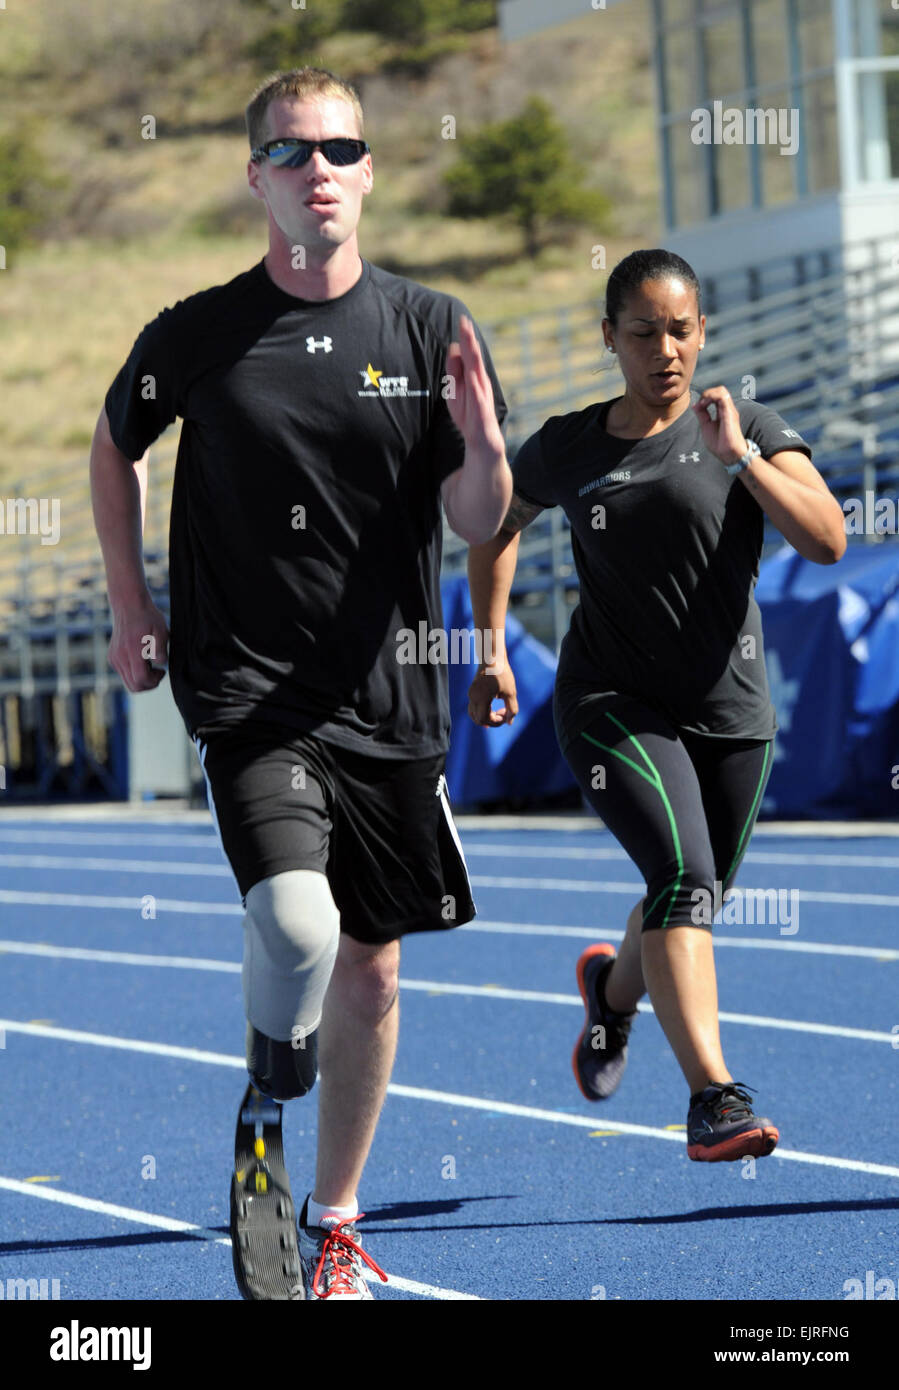 Army Spc. Brynden Keller, 82nd Airborne Division, and 1st Lt. Lacey Hamilton, 323rd Military Intelligence Battalion, round the track during training for the 2012 Warrior Games at the U.S. Air Force Academy in Colorado Springs, Colo., April 23, 2012. Keller, an Indianapolis native, and Hamilton, a Wilmington, Del., native, are two of 44 Army athletes participating in the Track and Field competition at the games. U.S. Army  Sgt. Jennifer Spradlin, 43rd Public Affairs Detachment Stock Photo